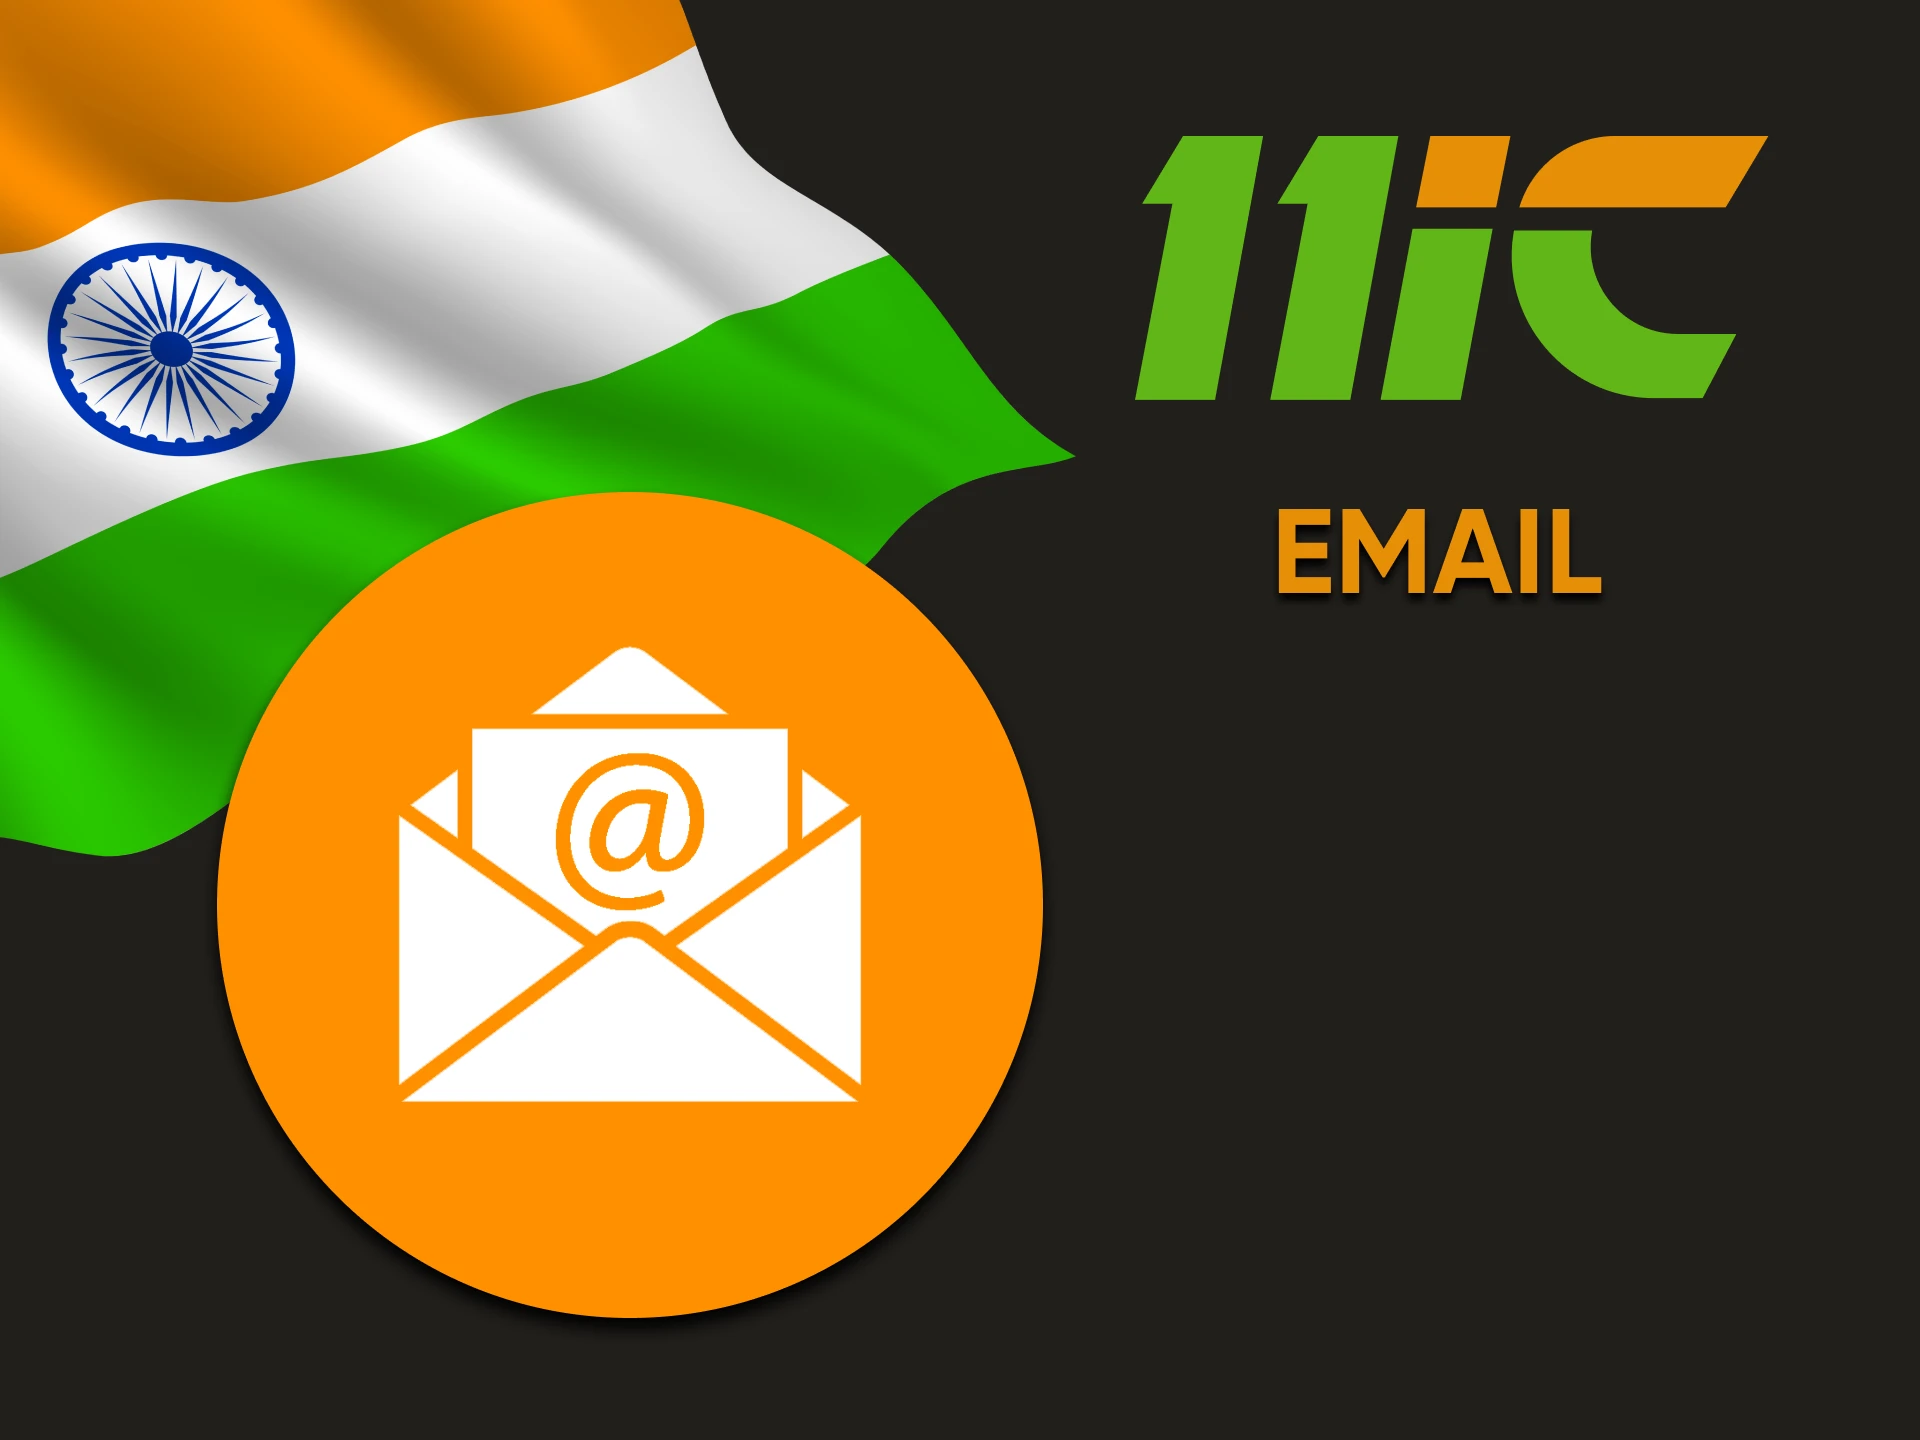 You can contact 11ic via email.